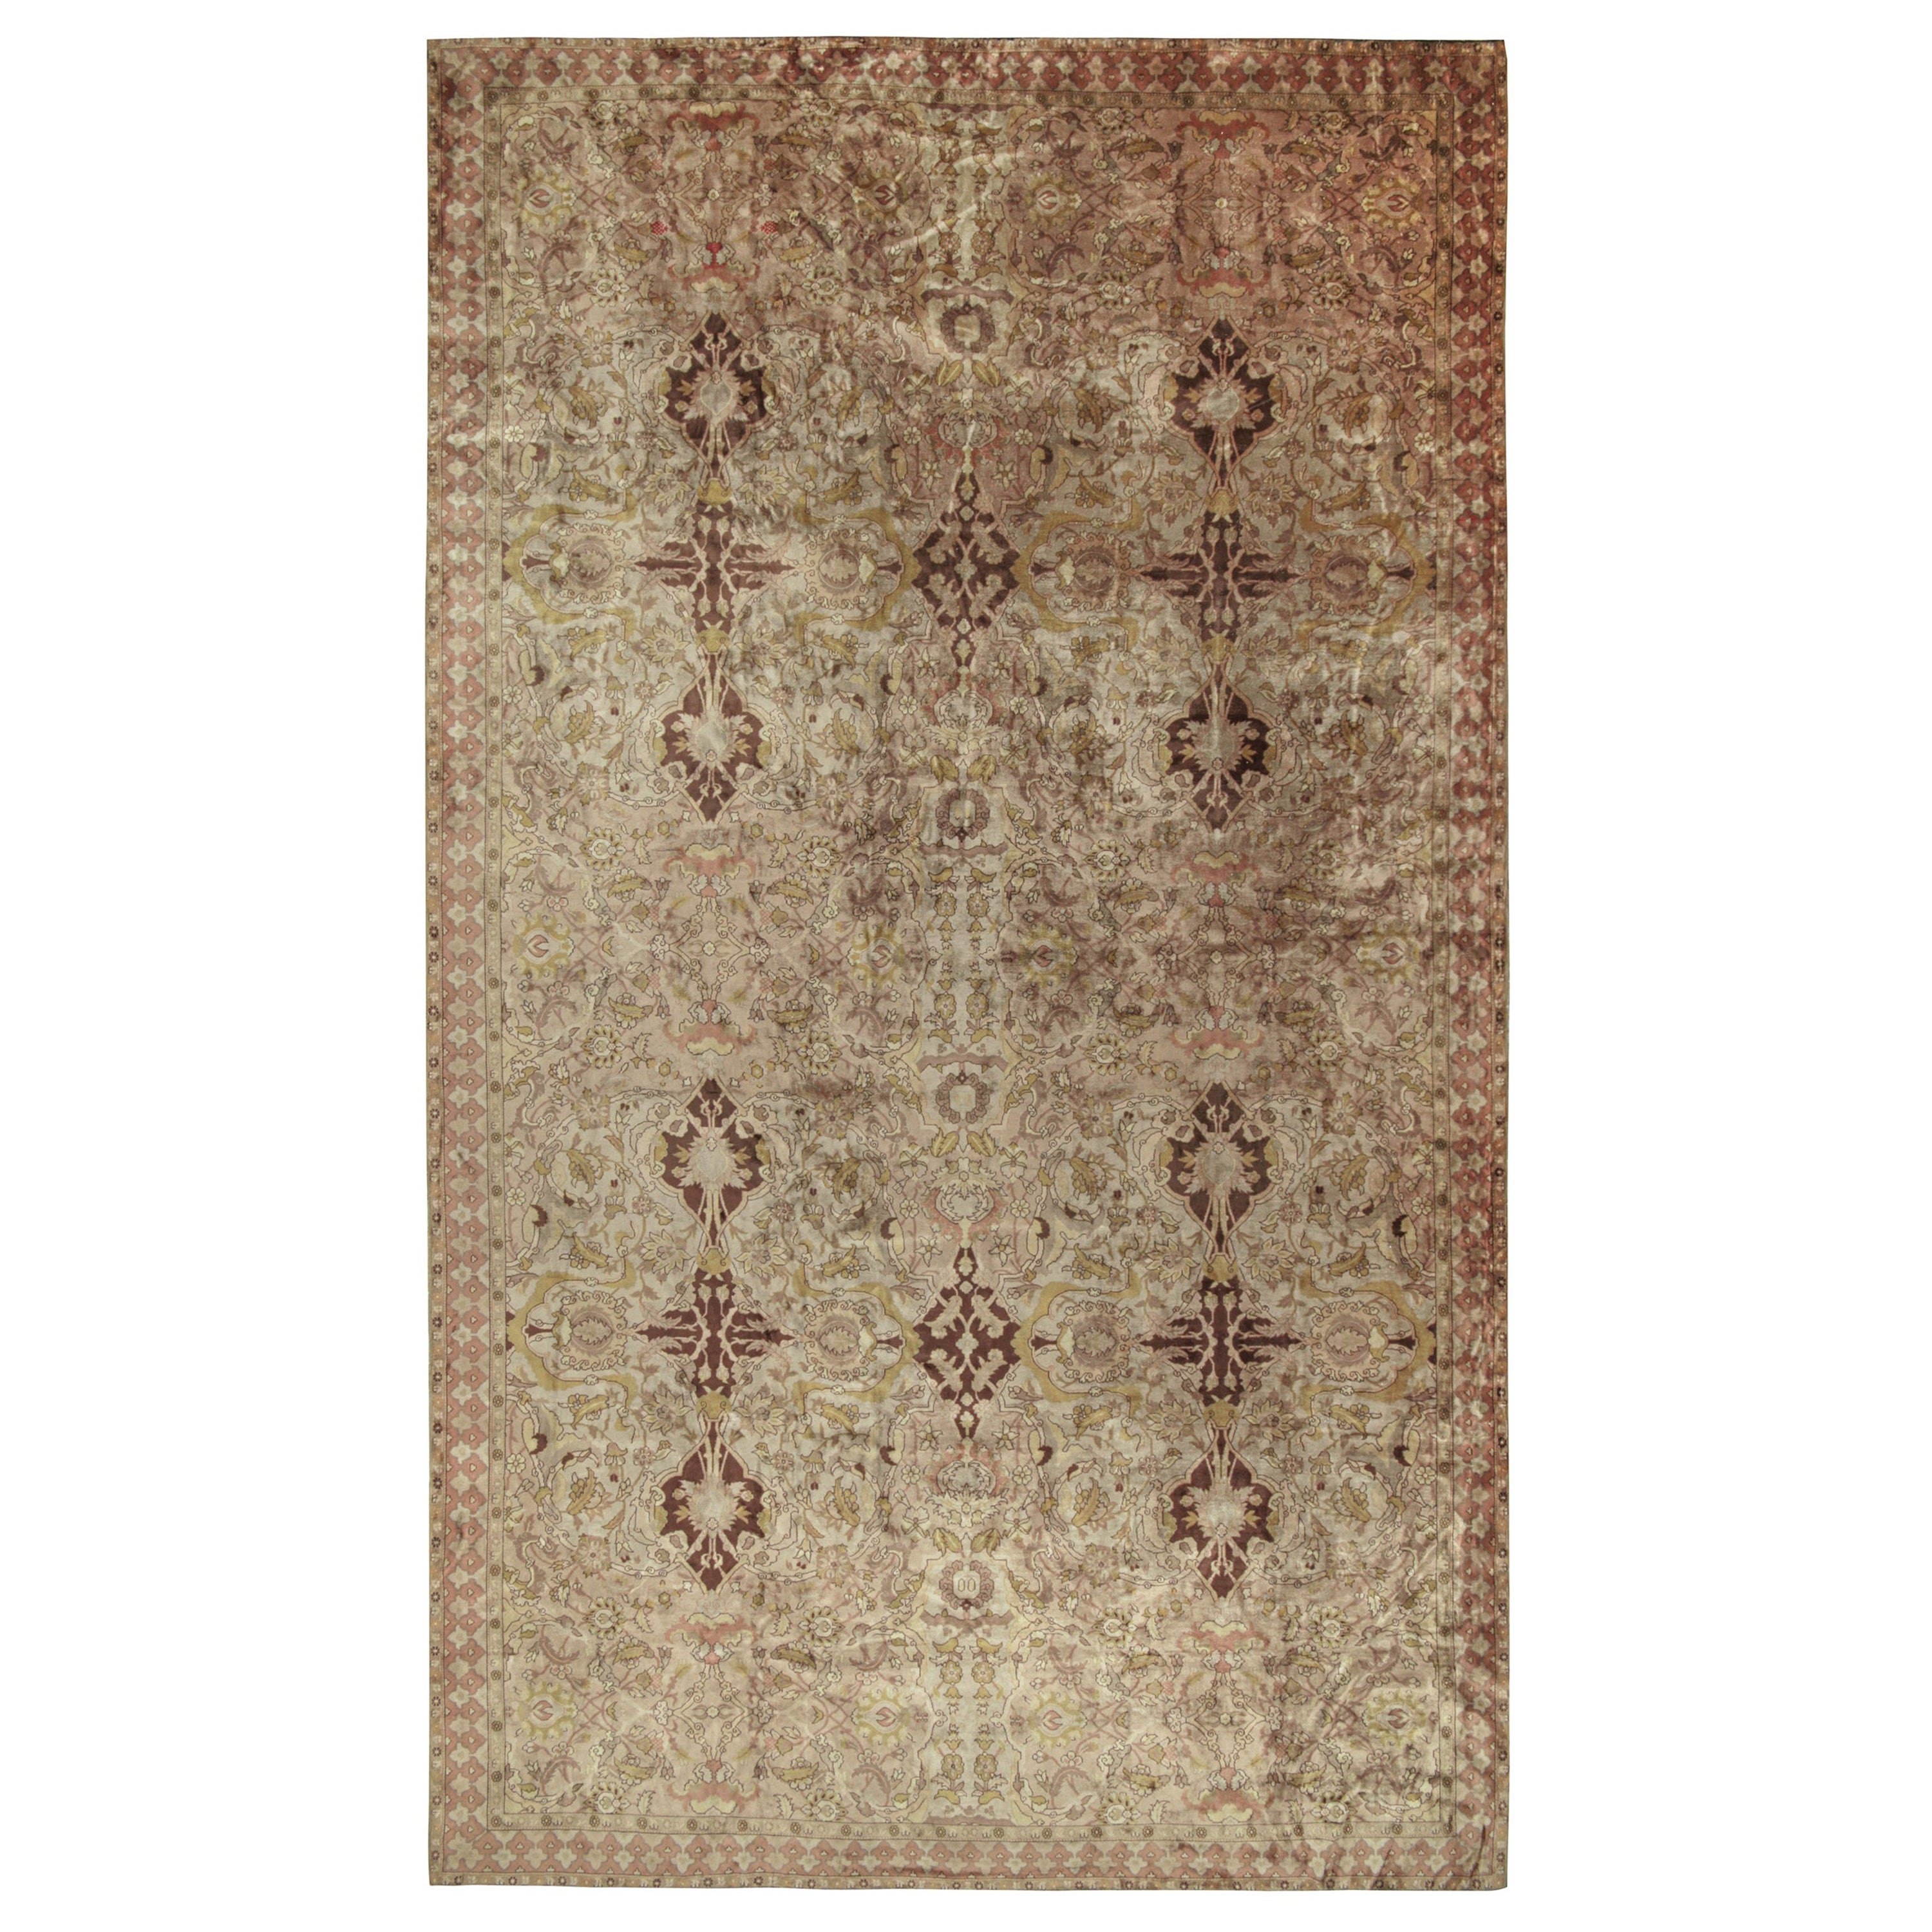 Antique Polonaise Palace Rug in Pink, Beige-Brown and Gold Floral Pattern For Sale